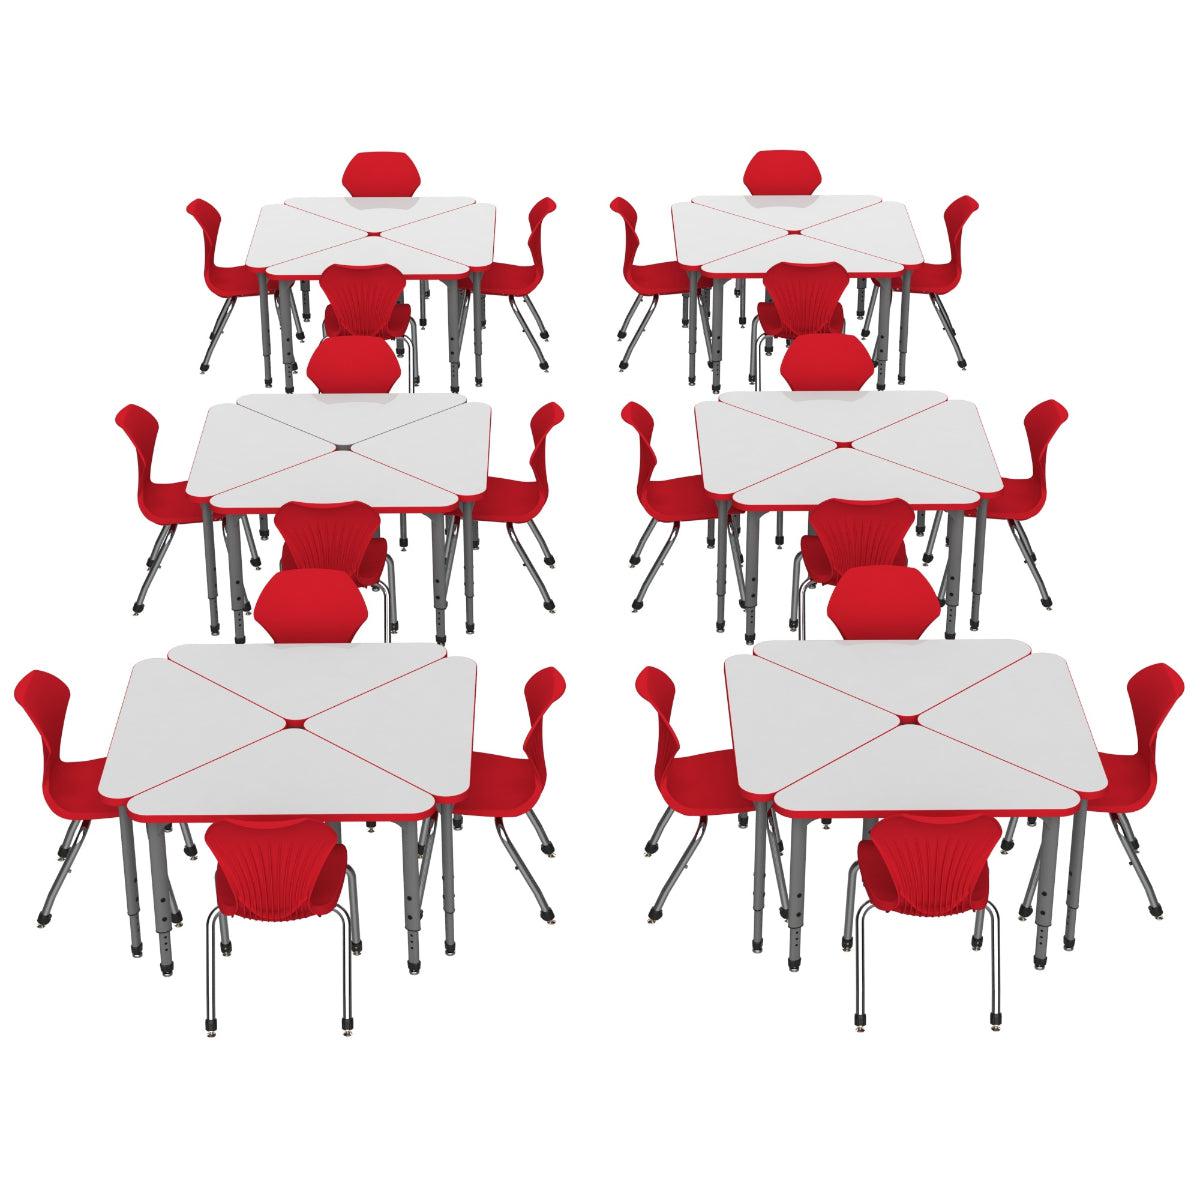 Apex Dry Erase Classroom Desk and Chair Package, 24 Triangle Collaborative Student Desks with 24 Apex Stack Chairs